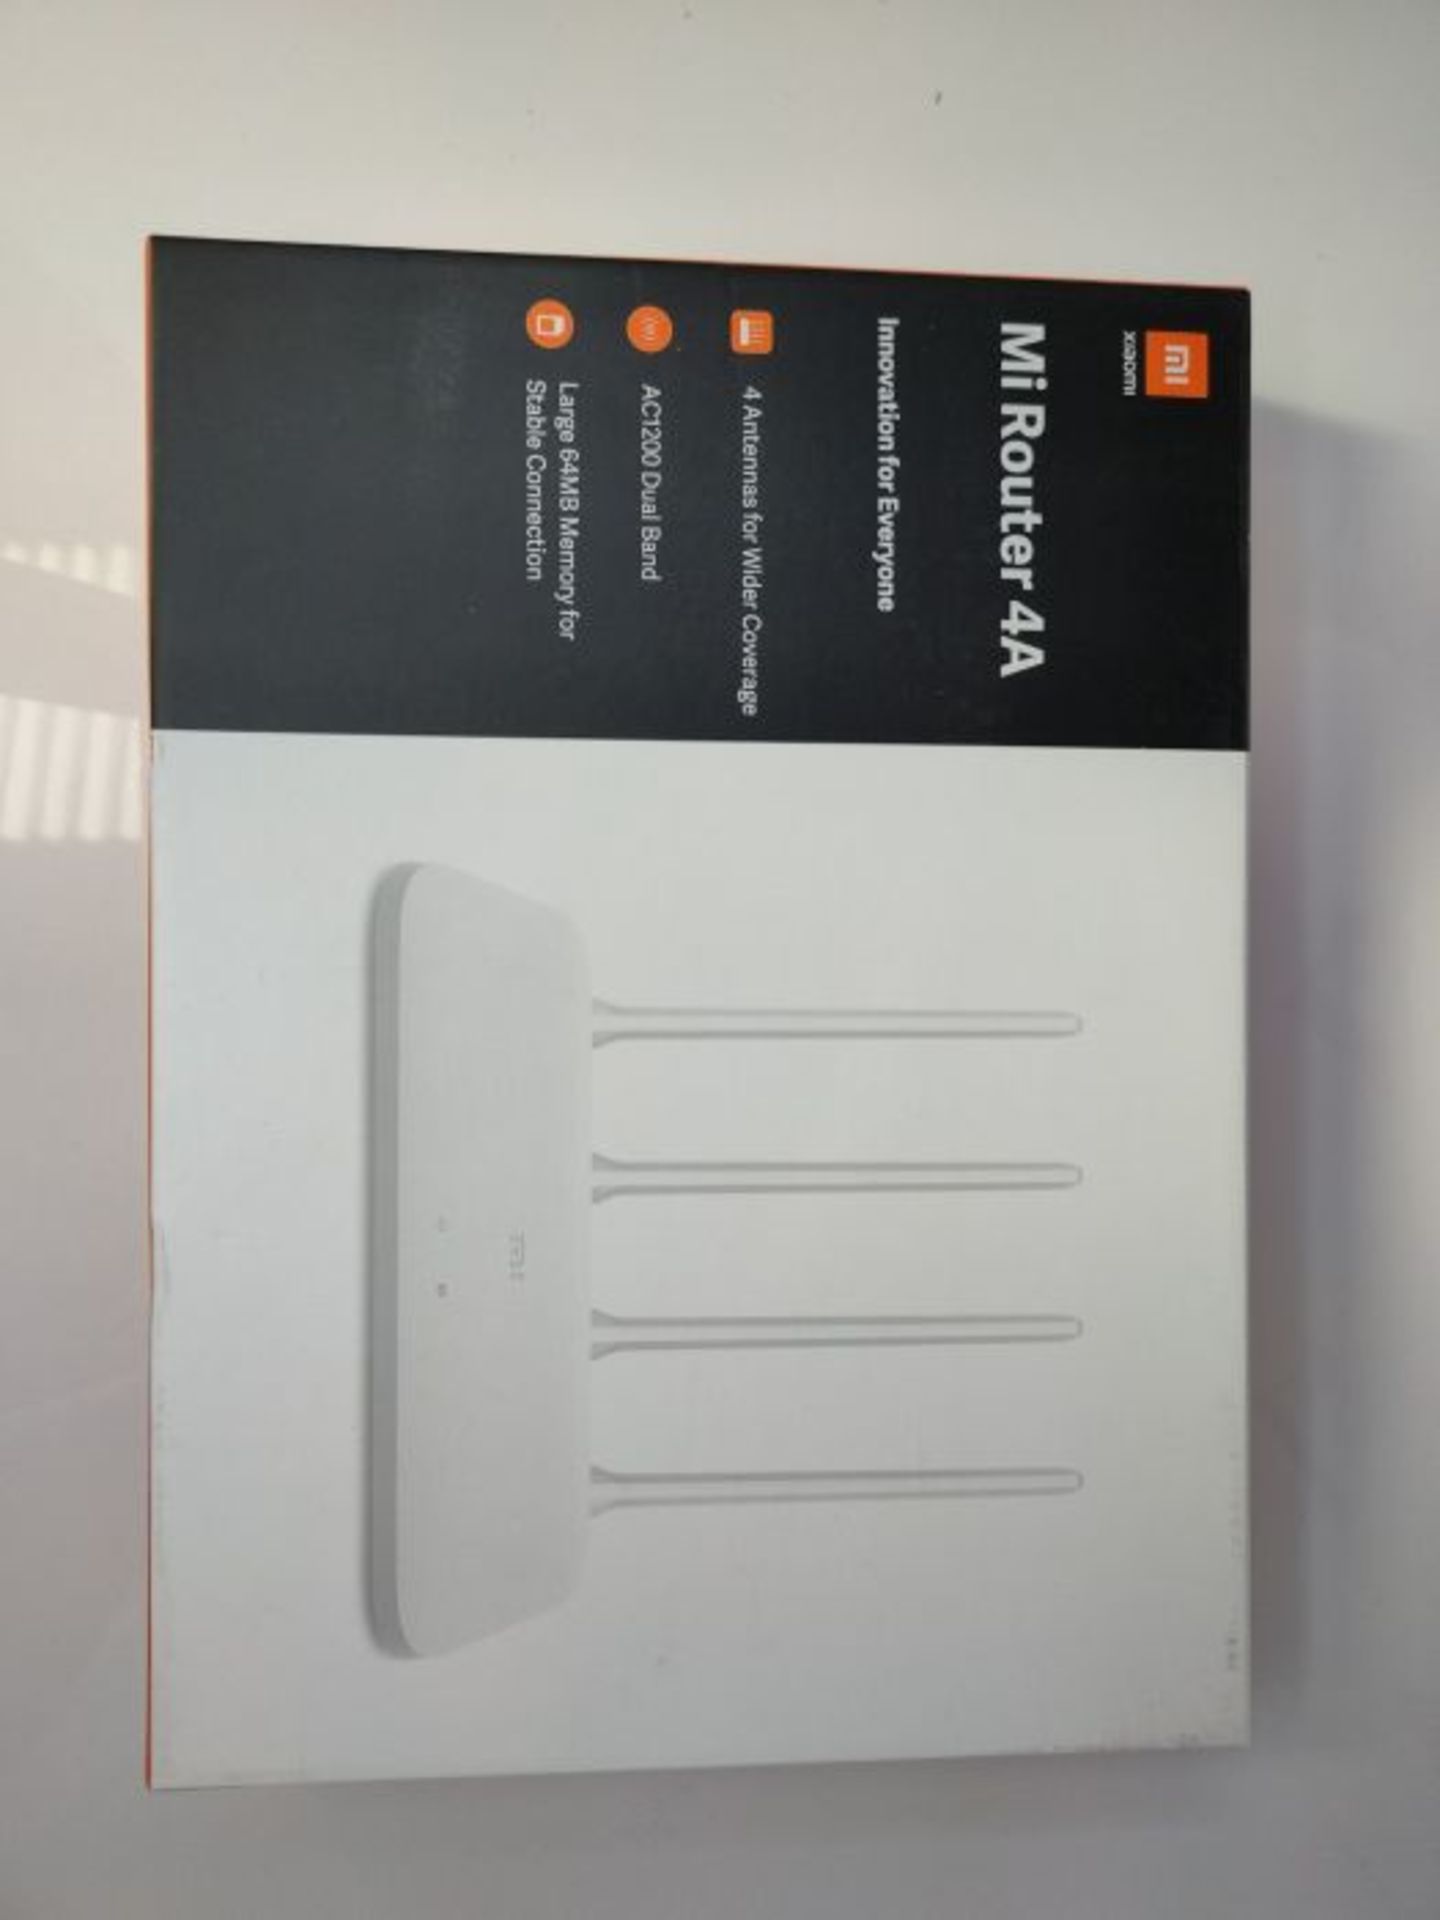 Xiaomi Mi Router 4A - Image 2 of 3